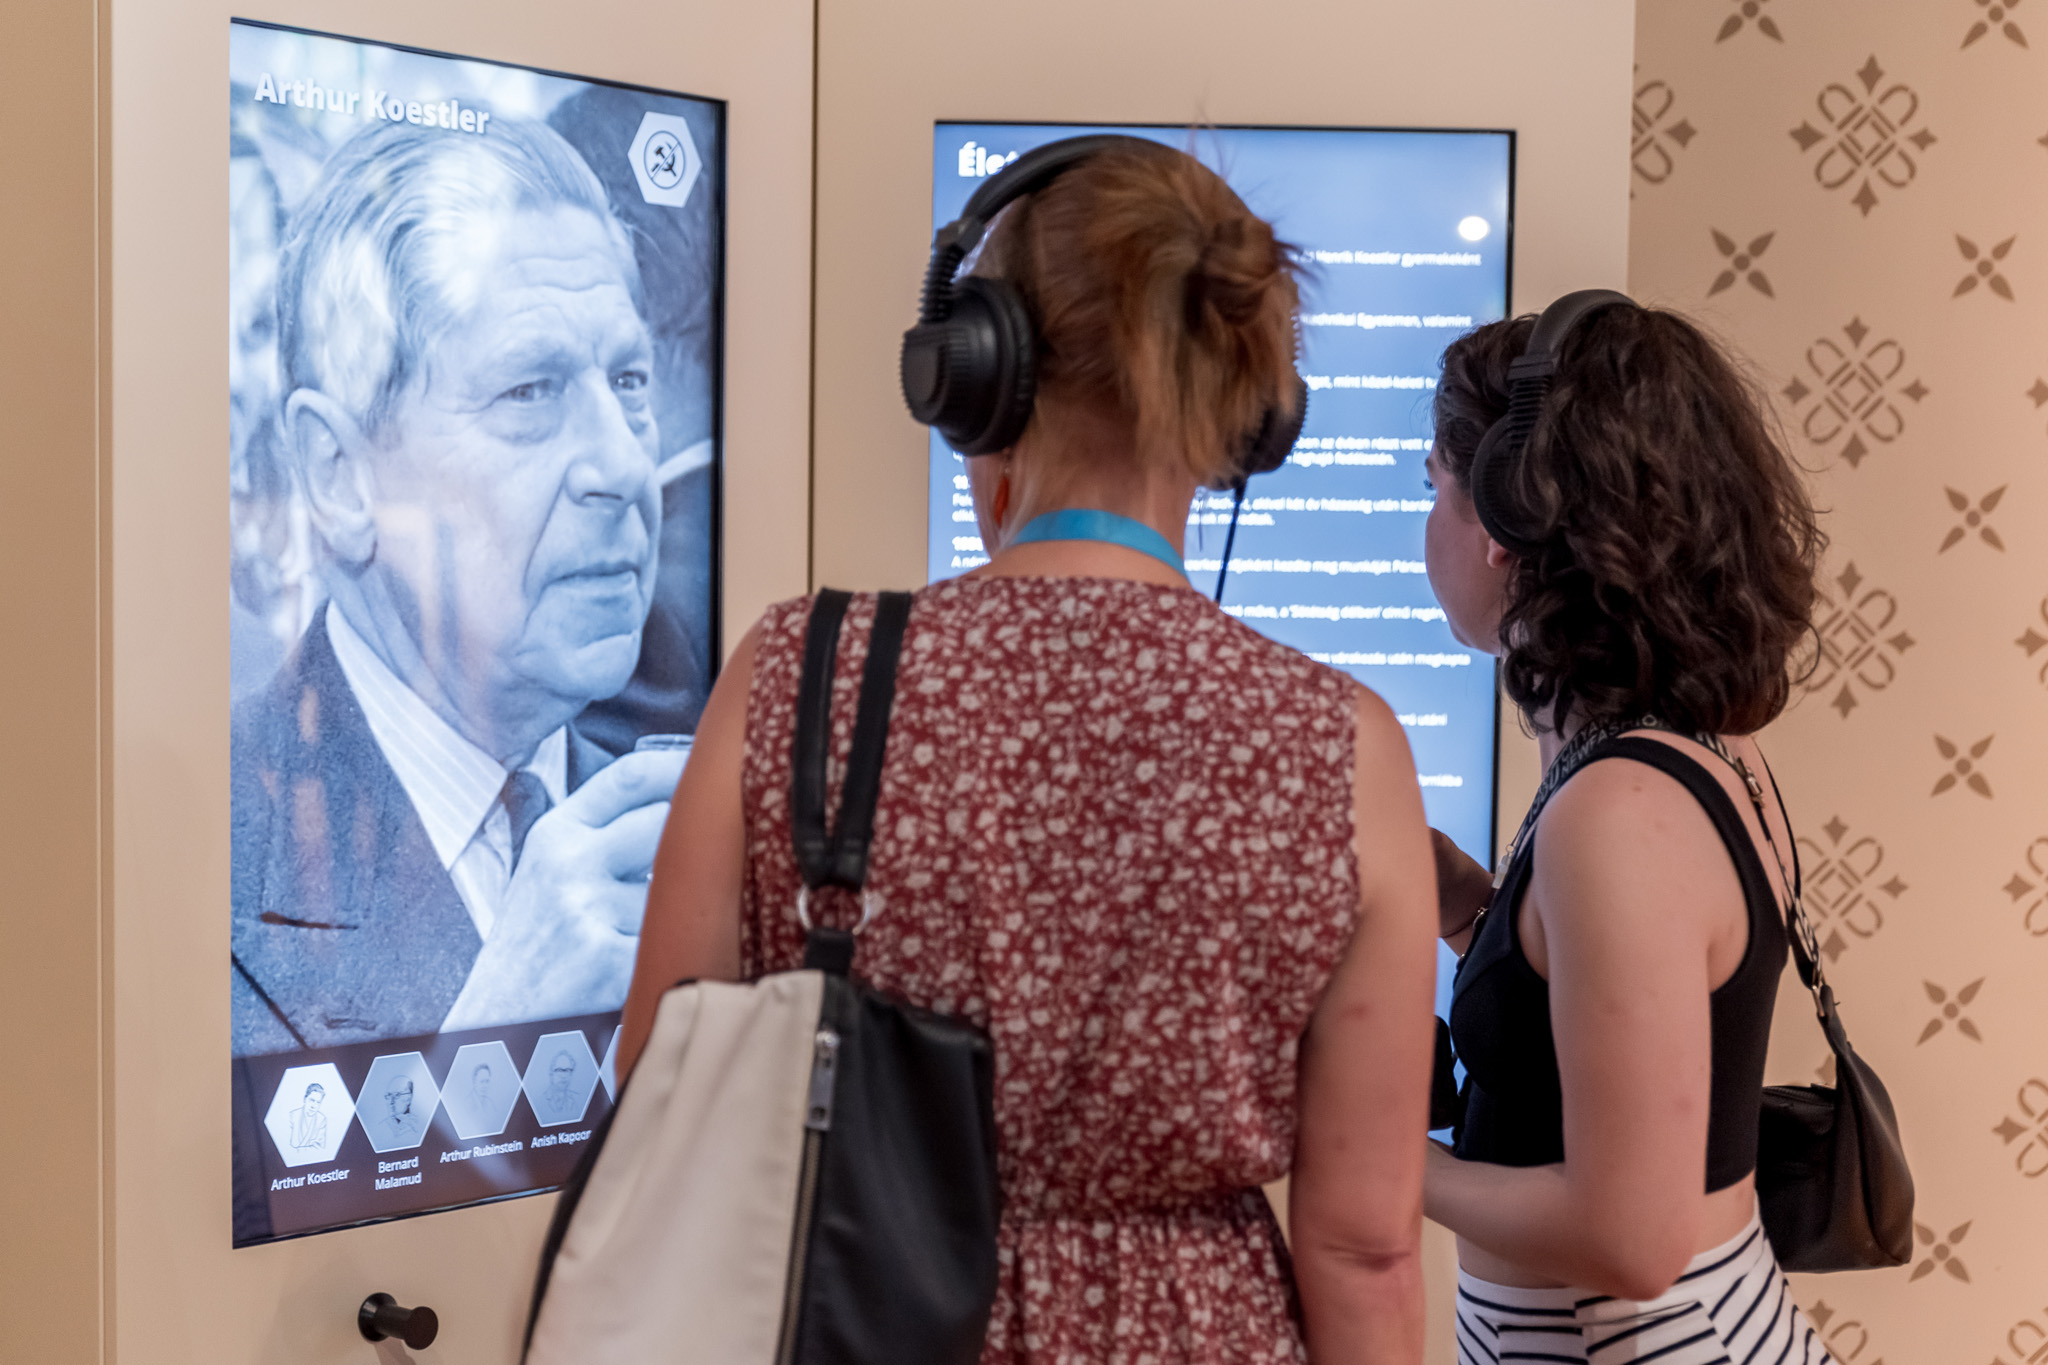 The exhibition allows visitors to learn about the life stories of more than 400 Jewish scientists, artists and athletes. 